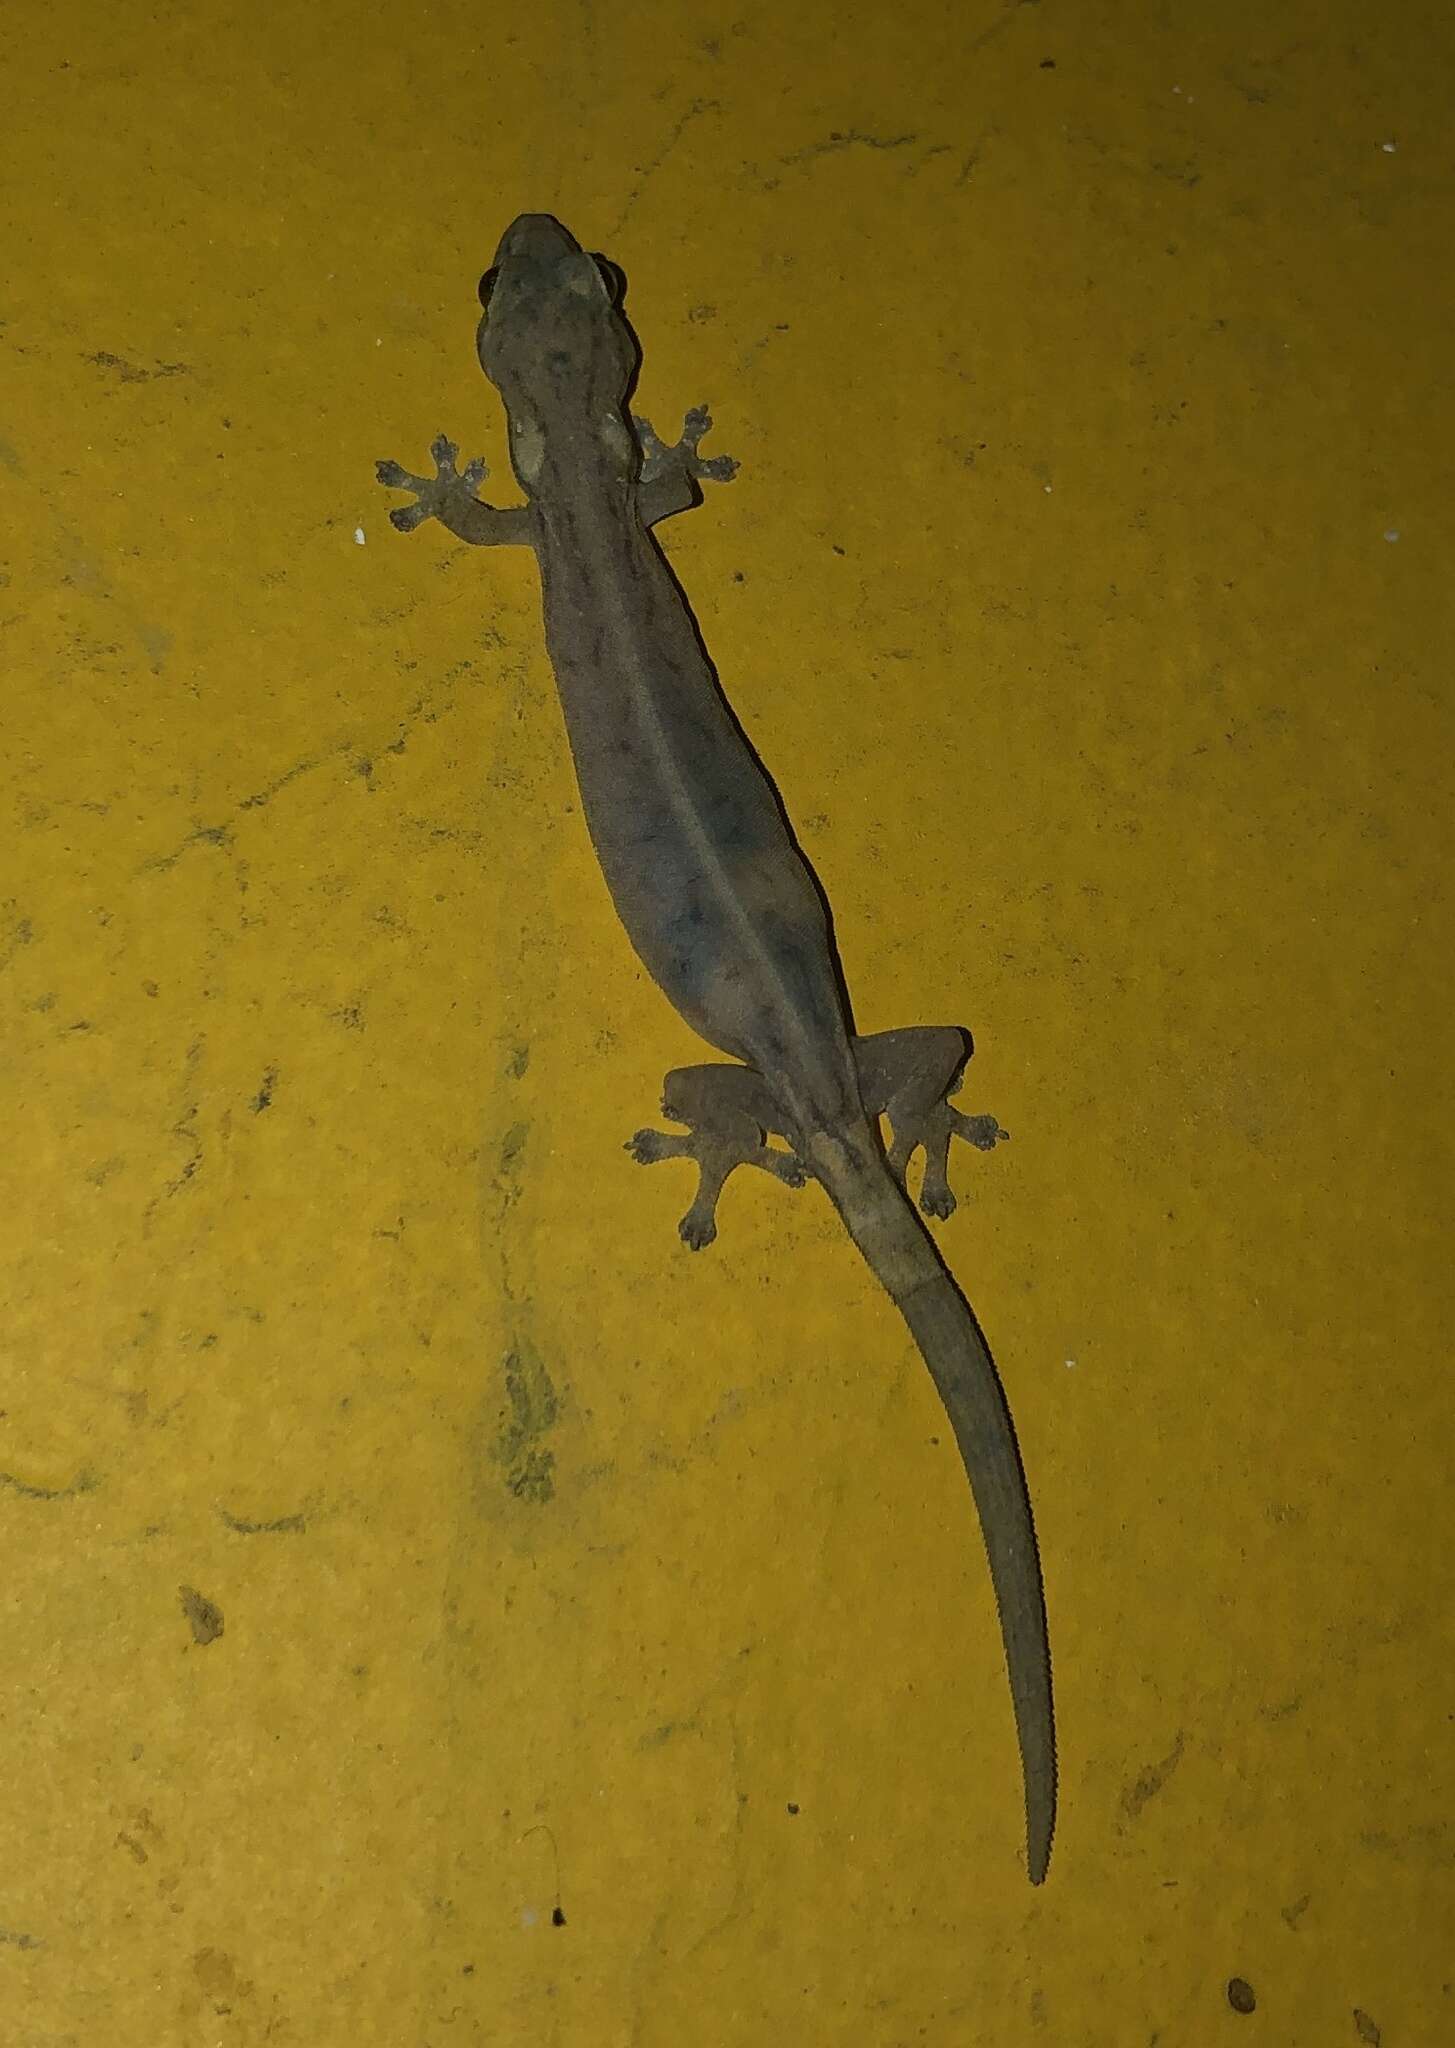 Image of Common Dwarf Gecko